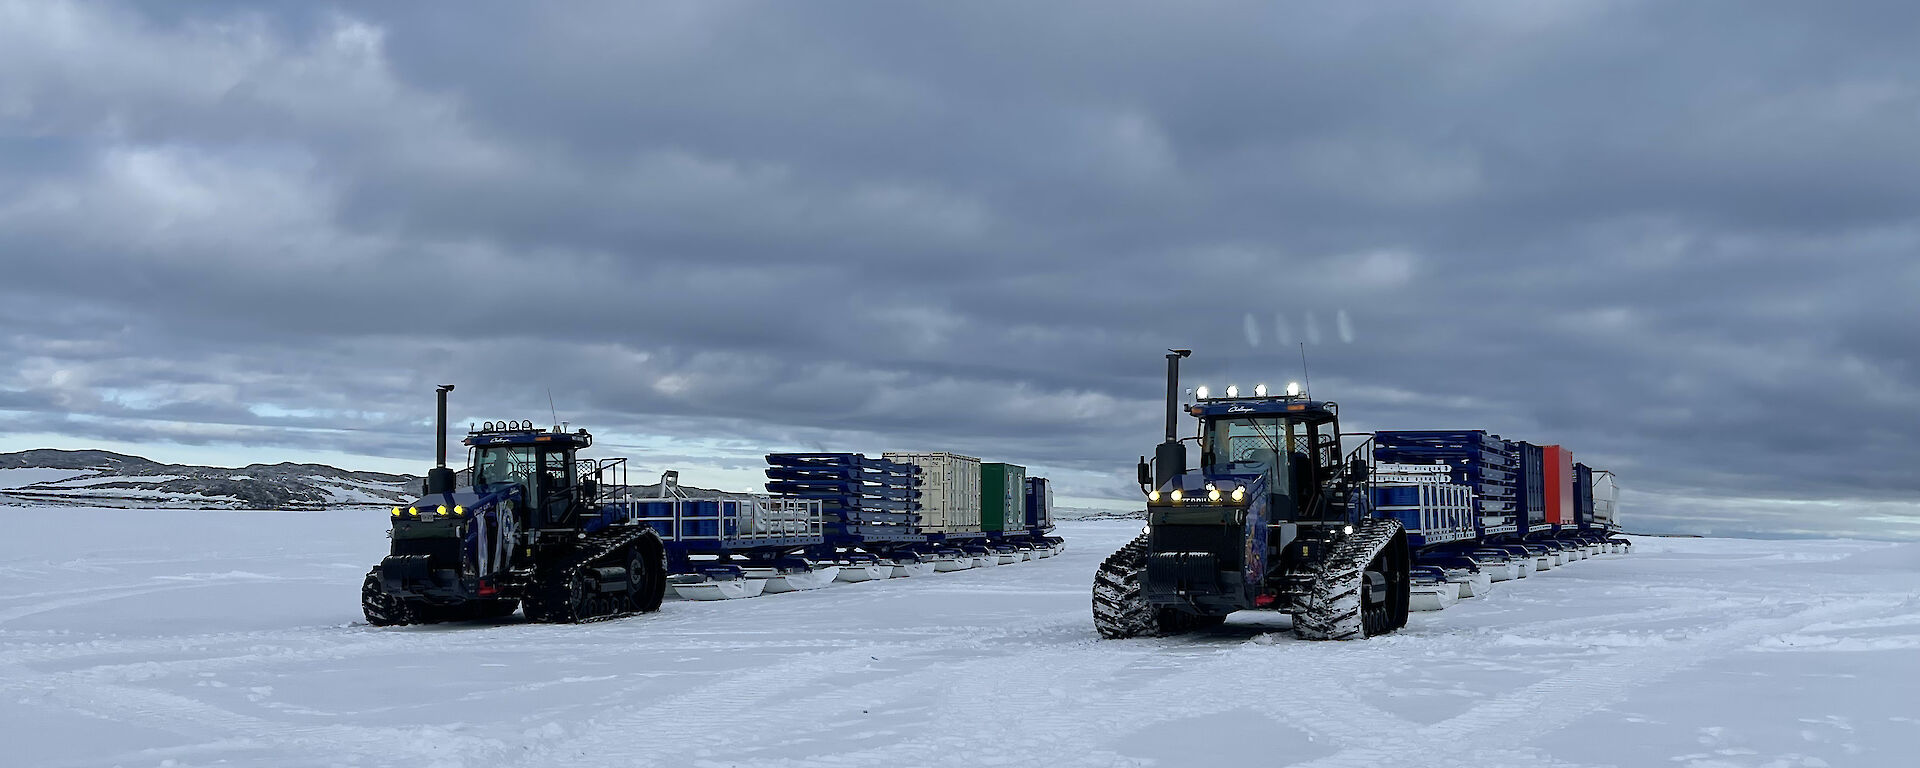 2 tractors tow long trains of shipping containers on sleds across the ice.